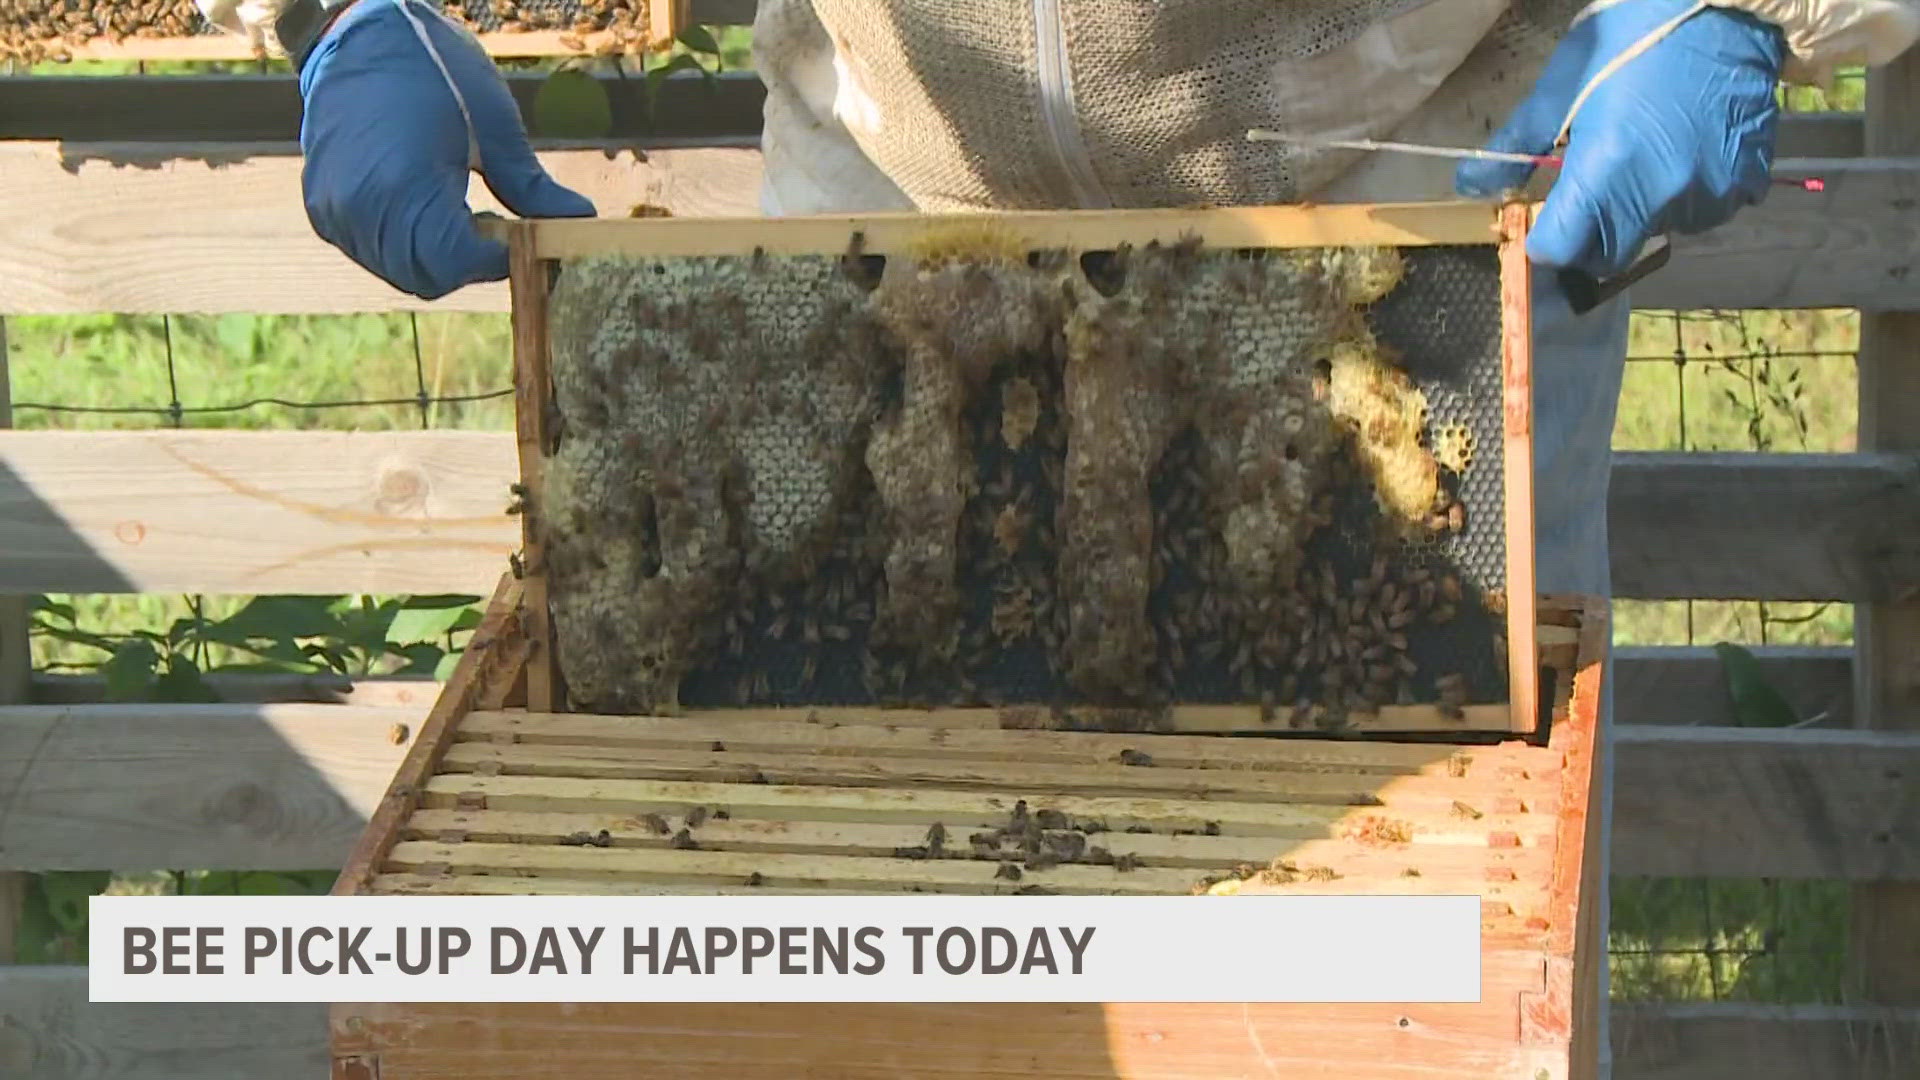 The annual Bee Pick-Up Day is a sign that flowers and crops will soon be ready for the bees to pollinate them, ushering in the arrival of spring.